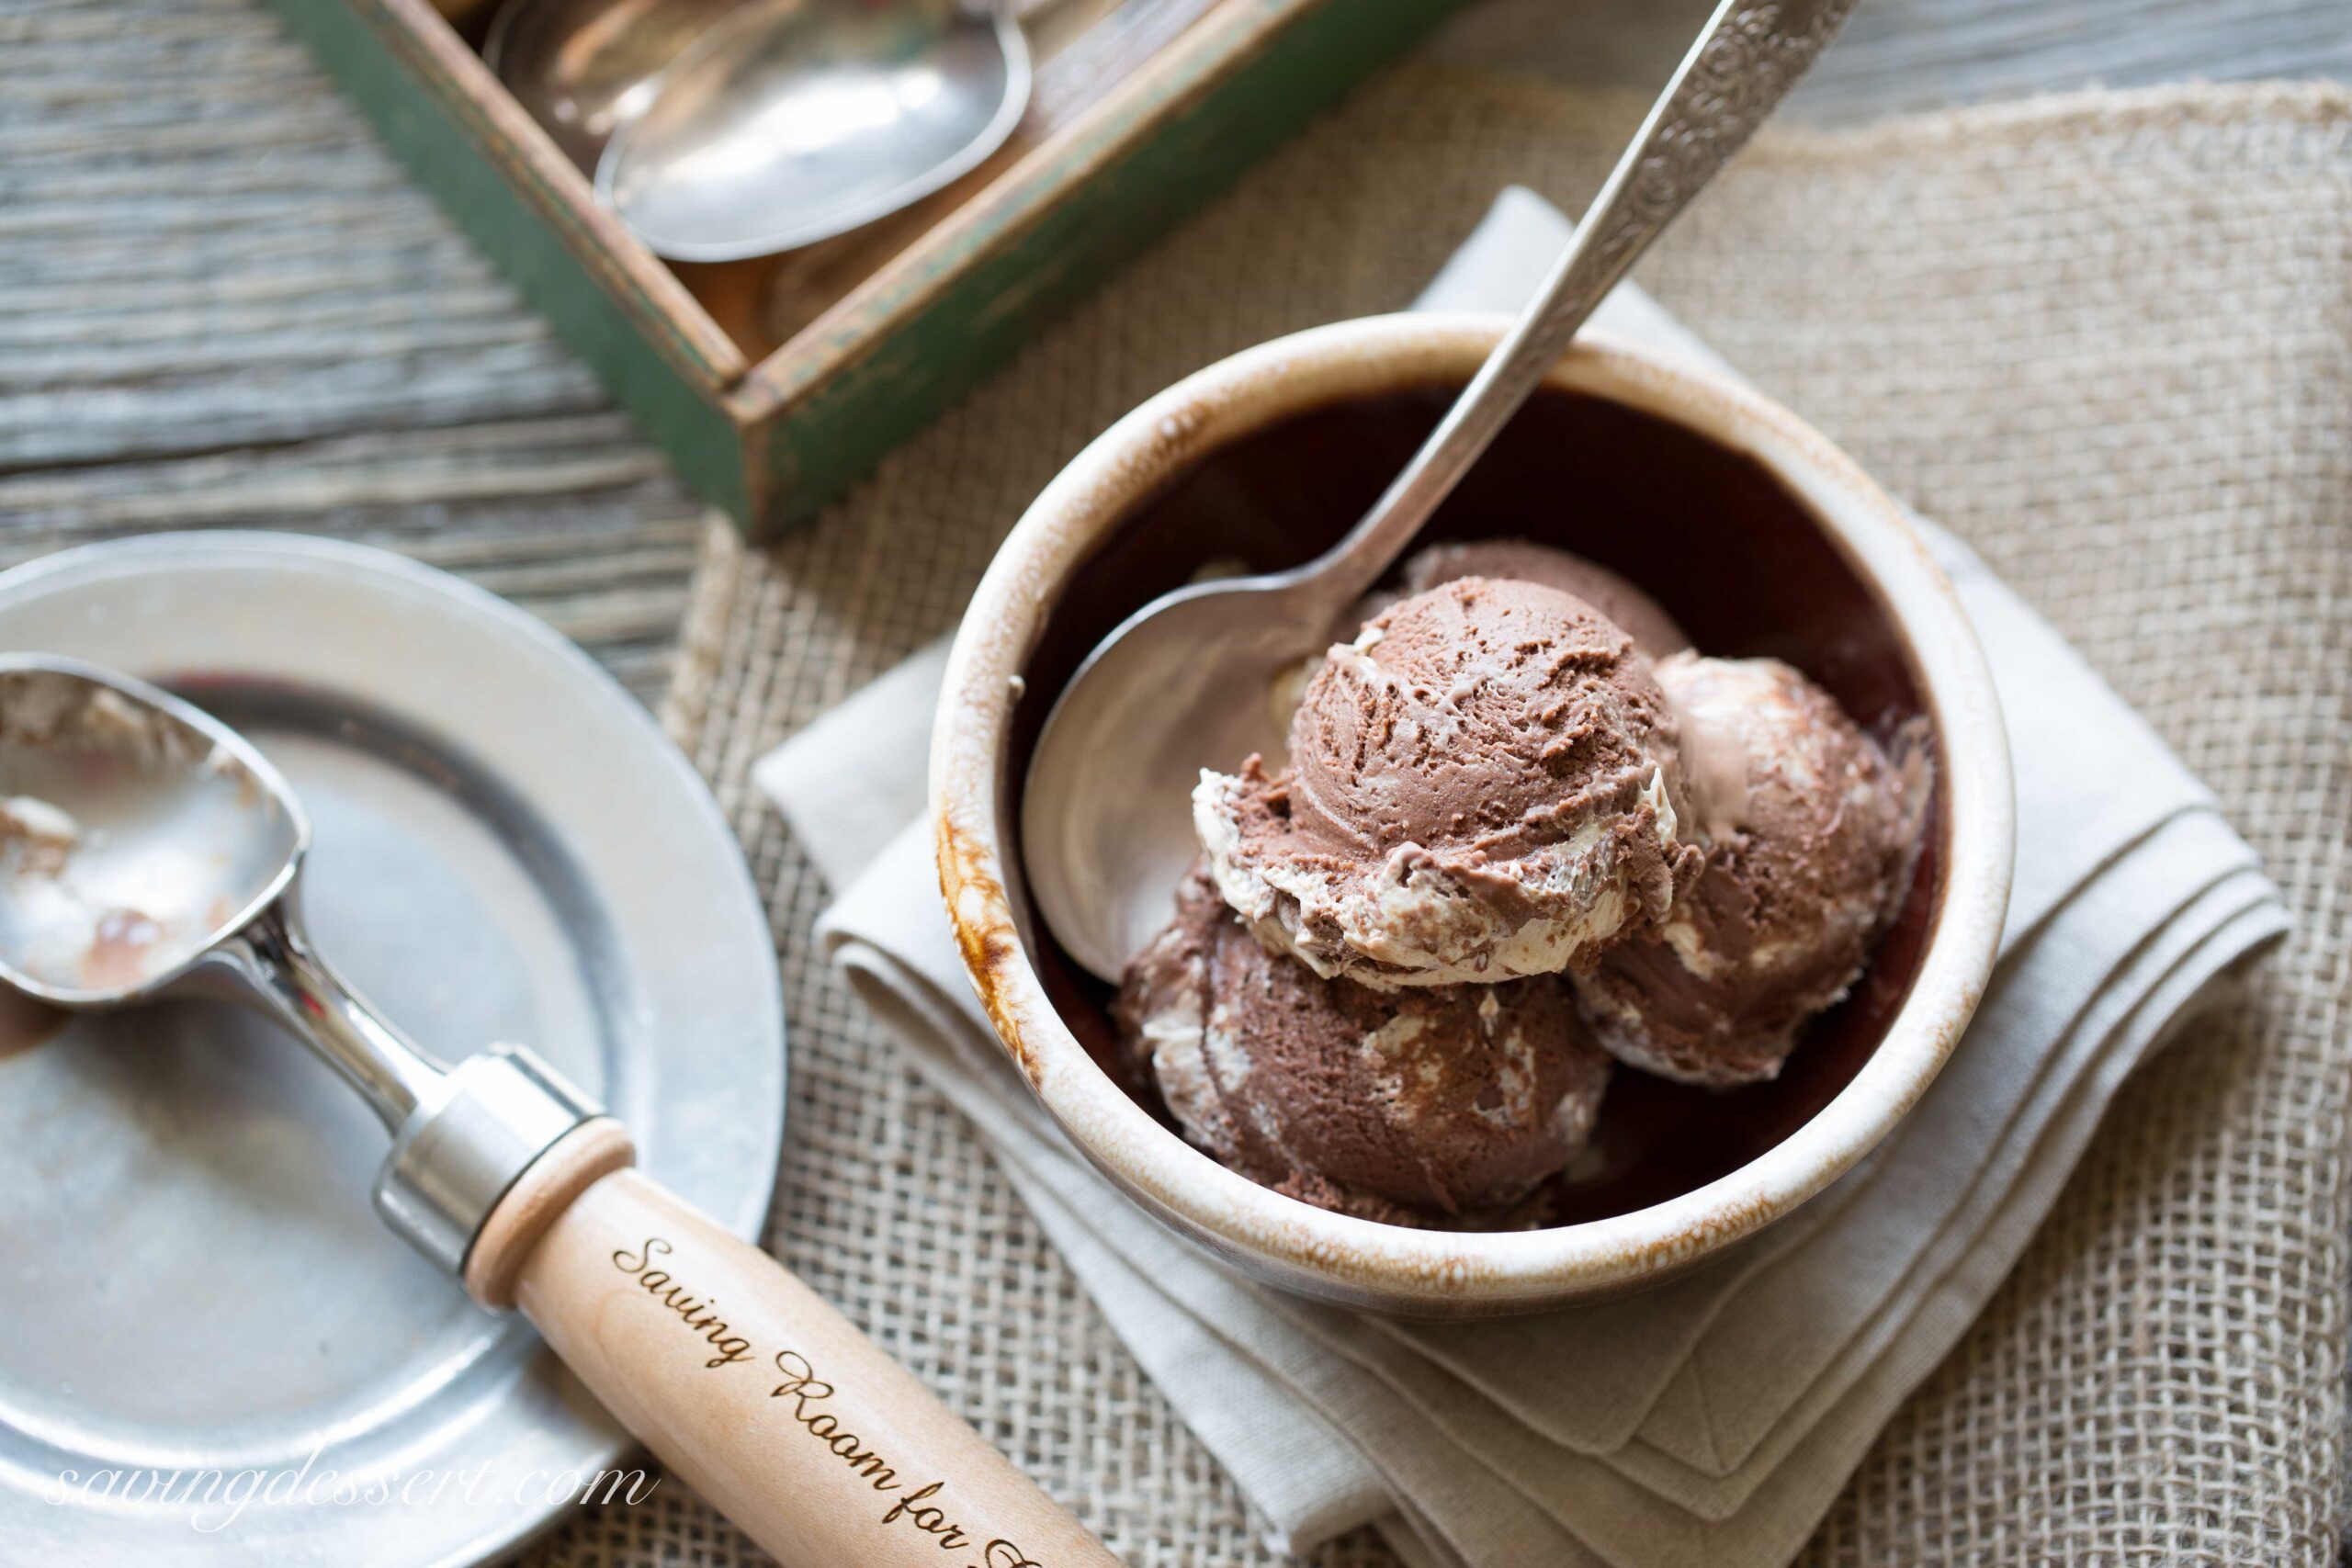 This Heated Ice Cream Scoop Makes Your Late-Night Craving Even Better